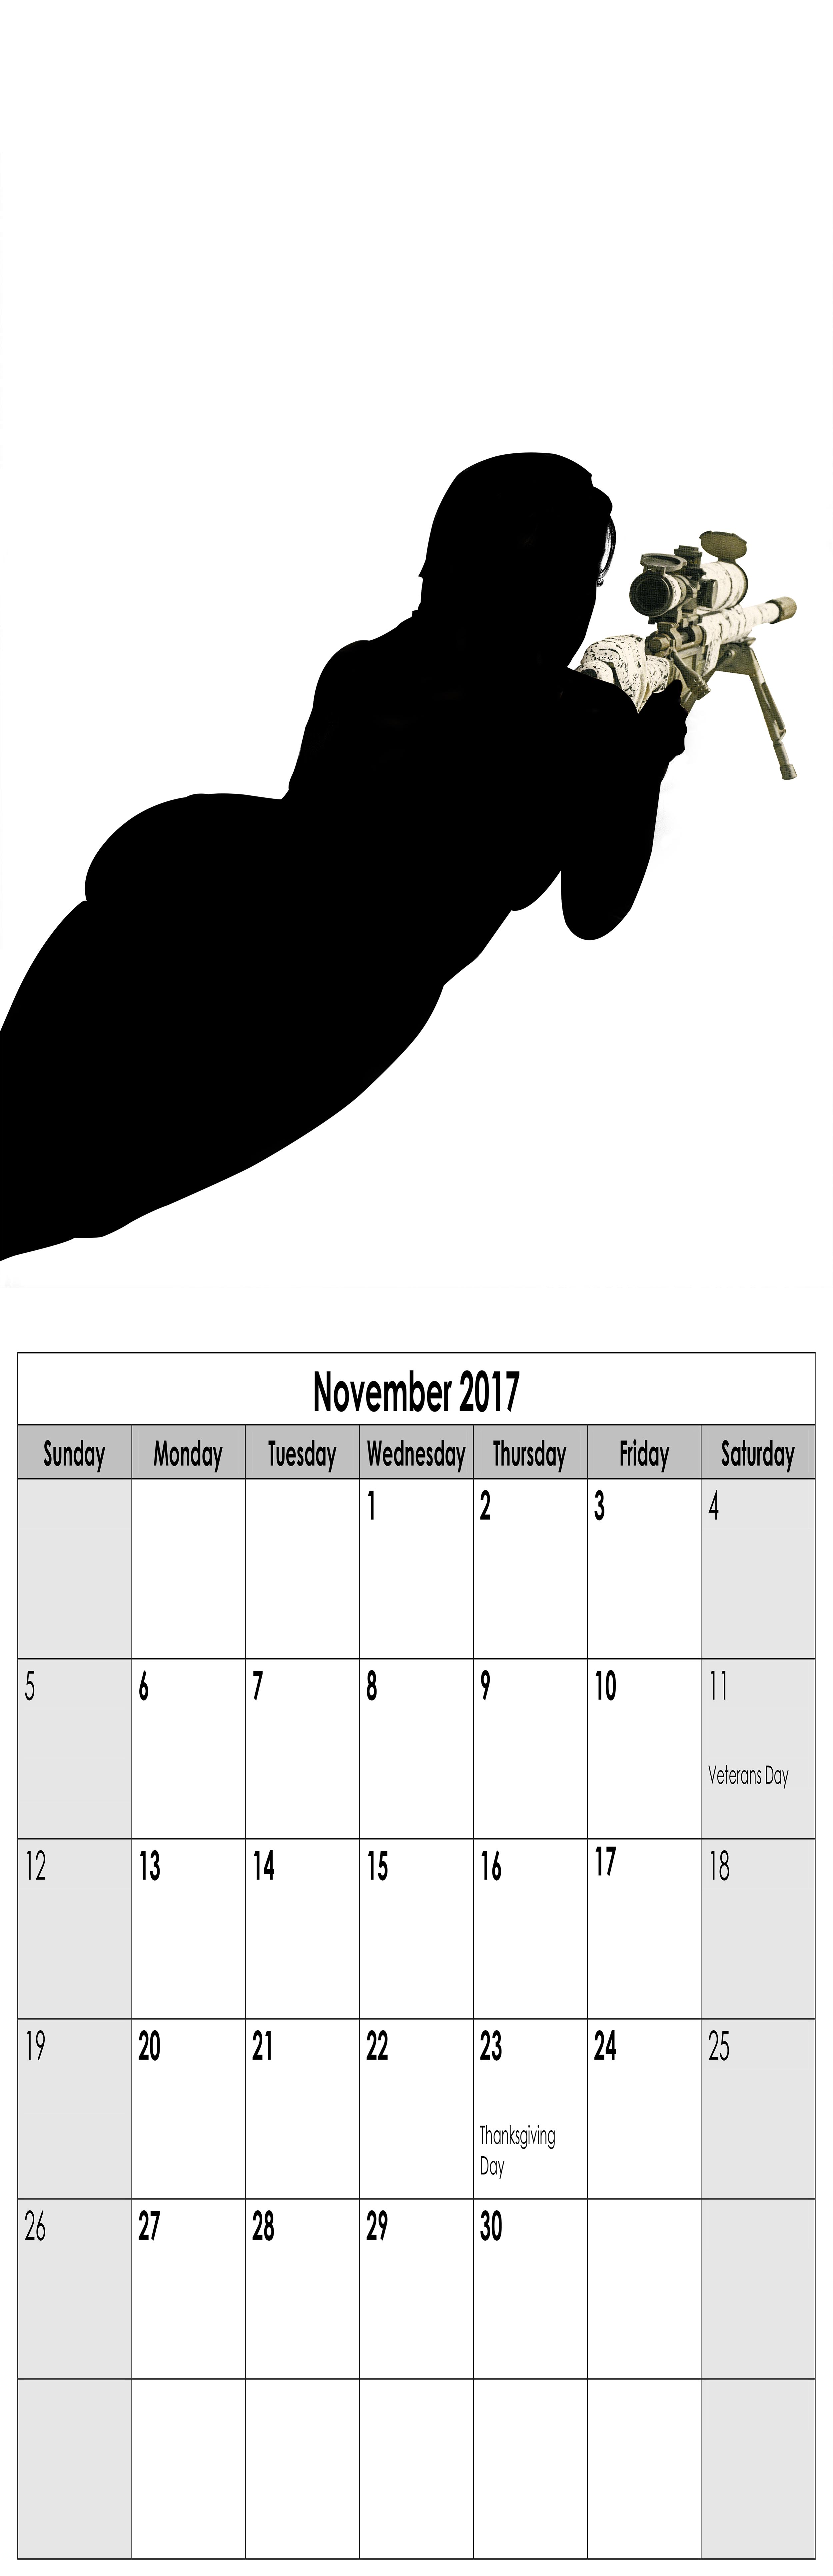 Year in Review (Miss November), 2016, Archival Pigment Print, 11"x34"